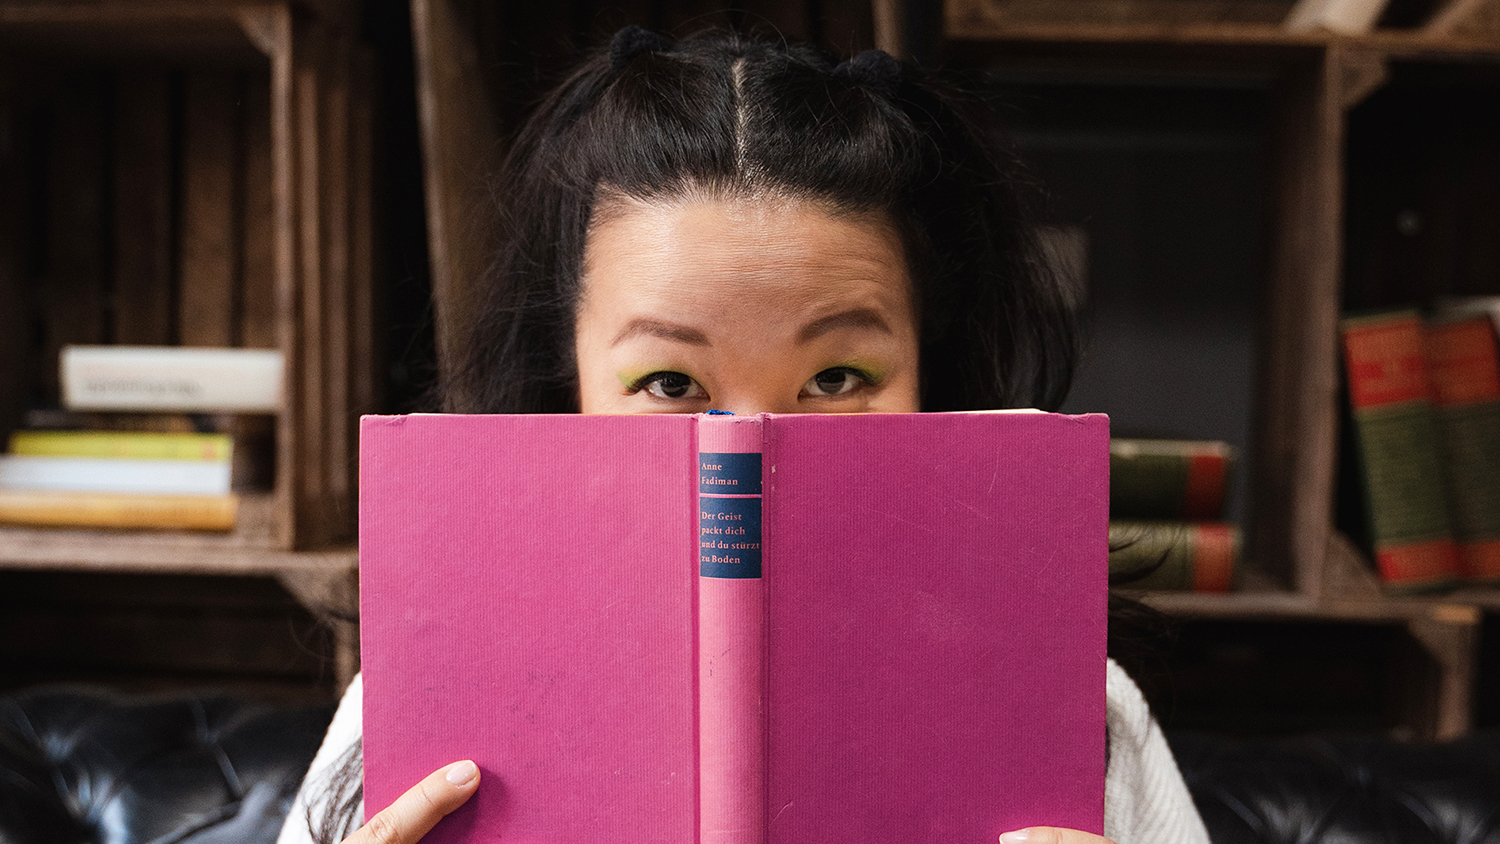 Young woman holding a book in front of her face